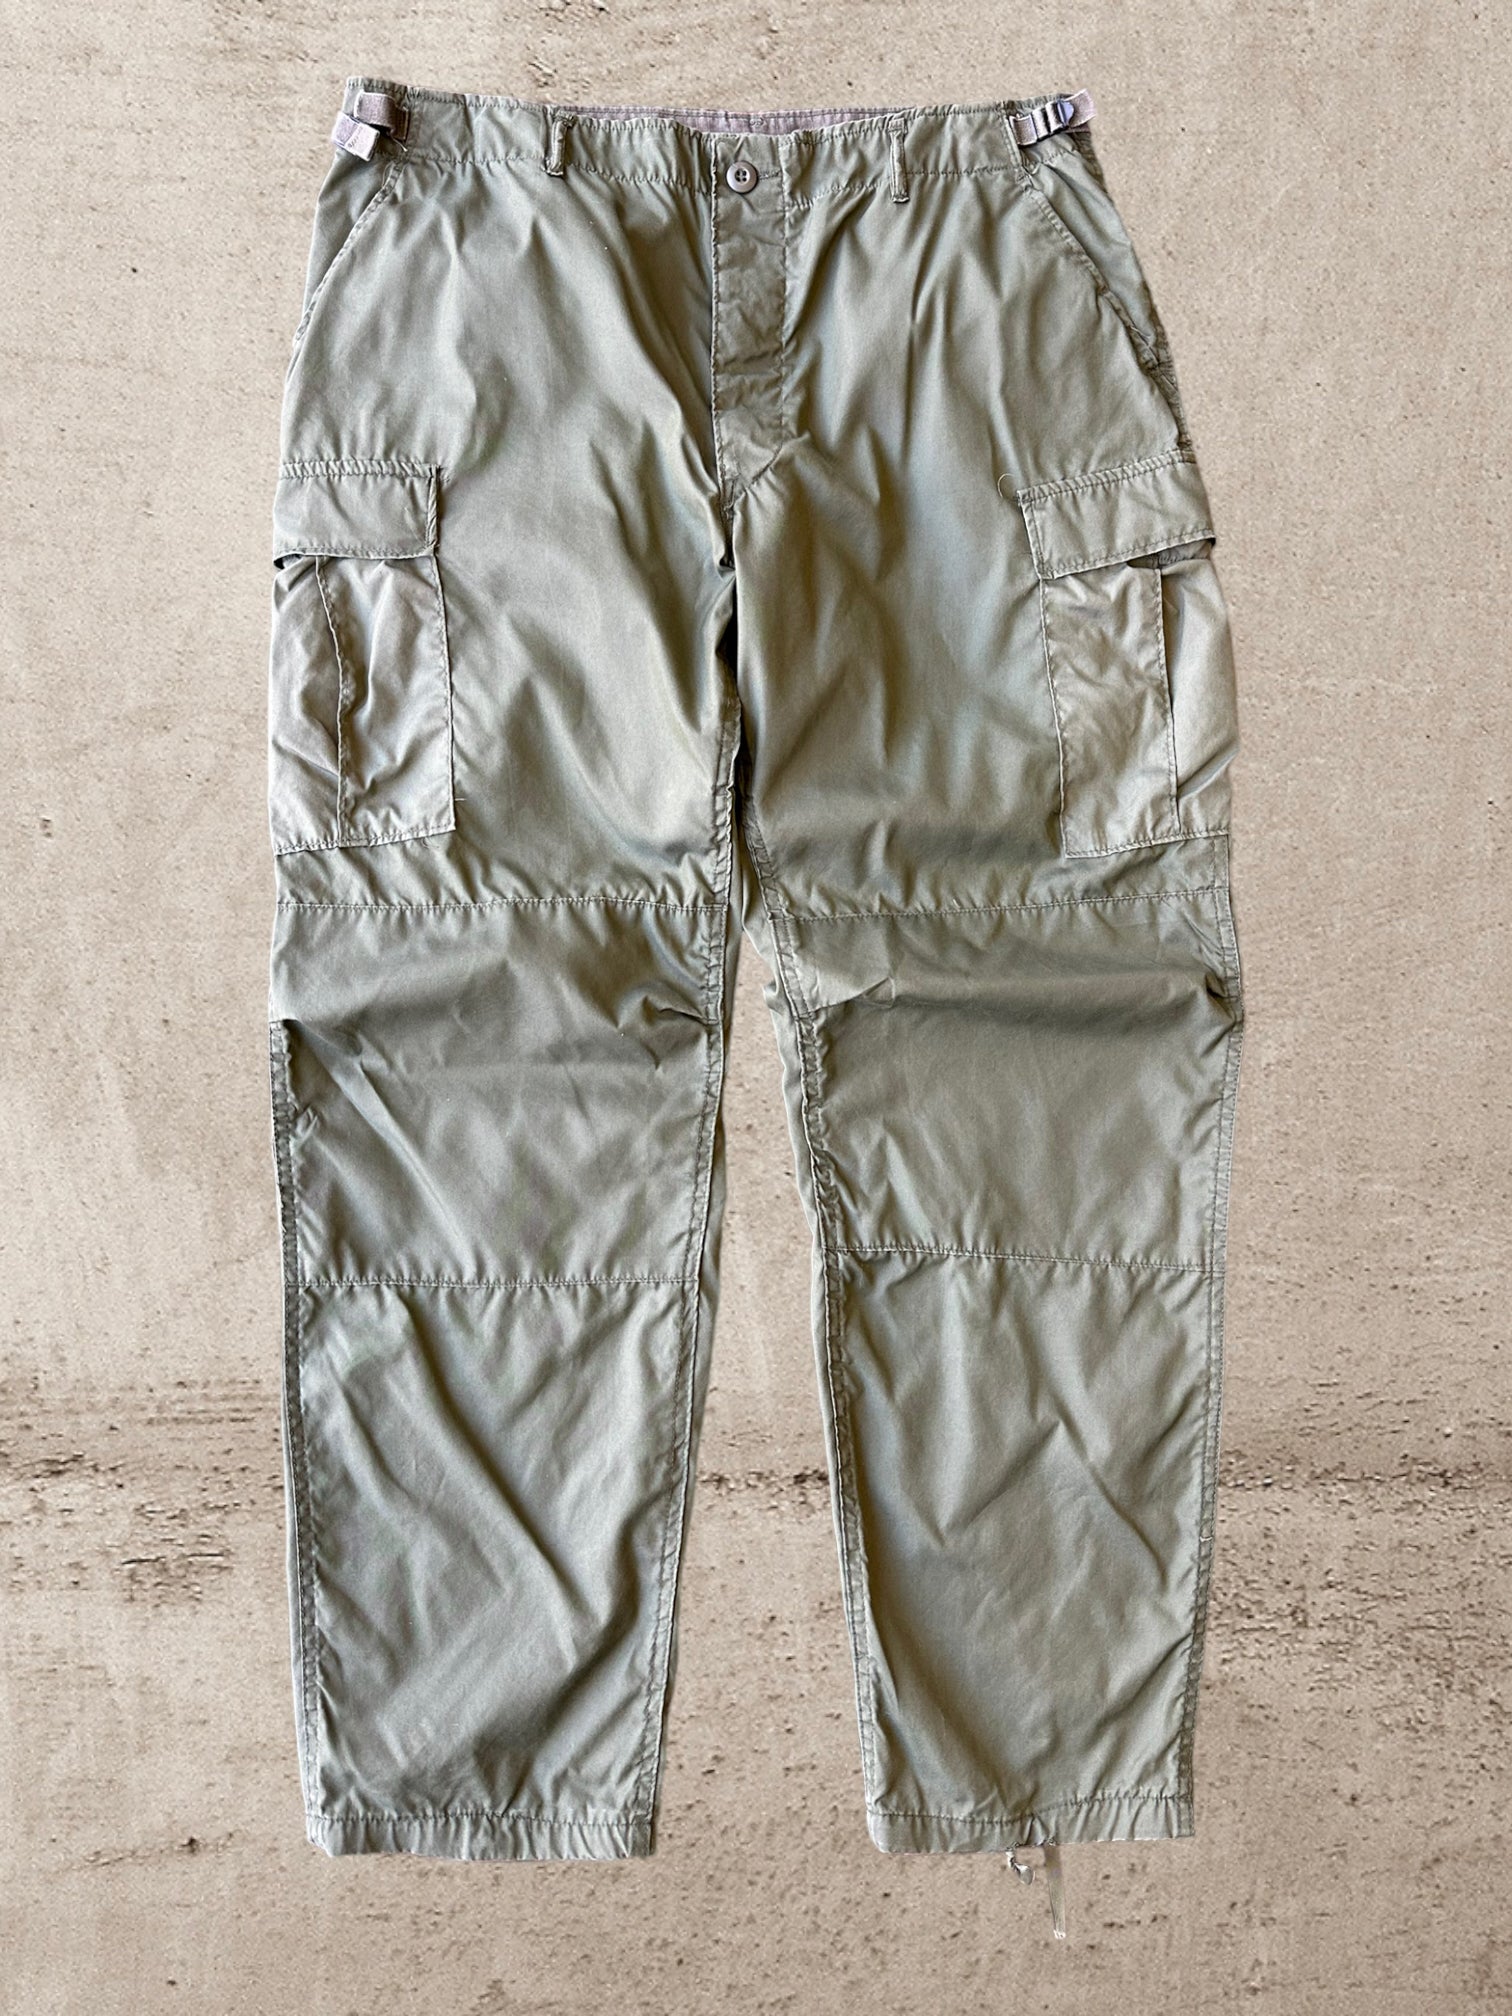 Vintage Military Green Cargo Pants - 35-39x31